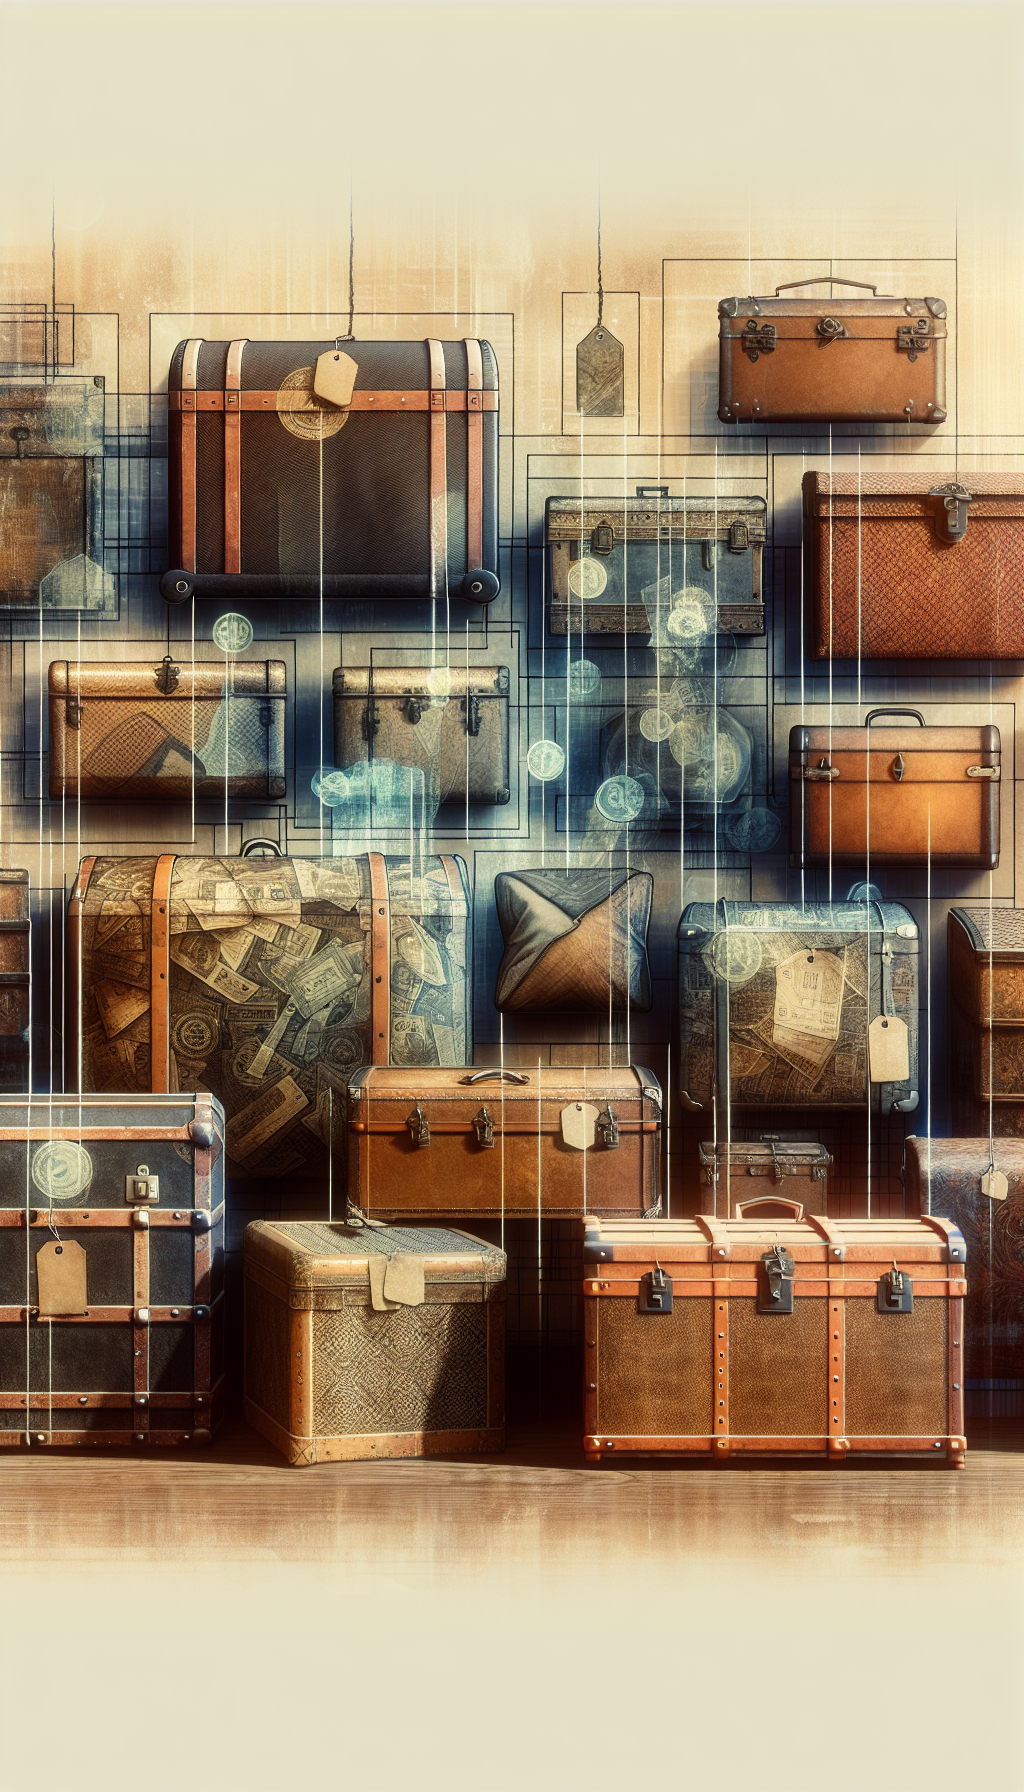 An eclectic montage of antique trunks from steamer to dowry, each intricately detailed, with a shimmering transparent overlay of currency symbols and aged price tags, indicating their worth. The trunks are set against a backdrop of a timeline, subtly showcasing their transition from practical luggage to treasured heirlooms, emphasizing the evolution of their value over time.